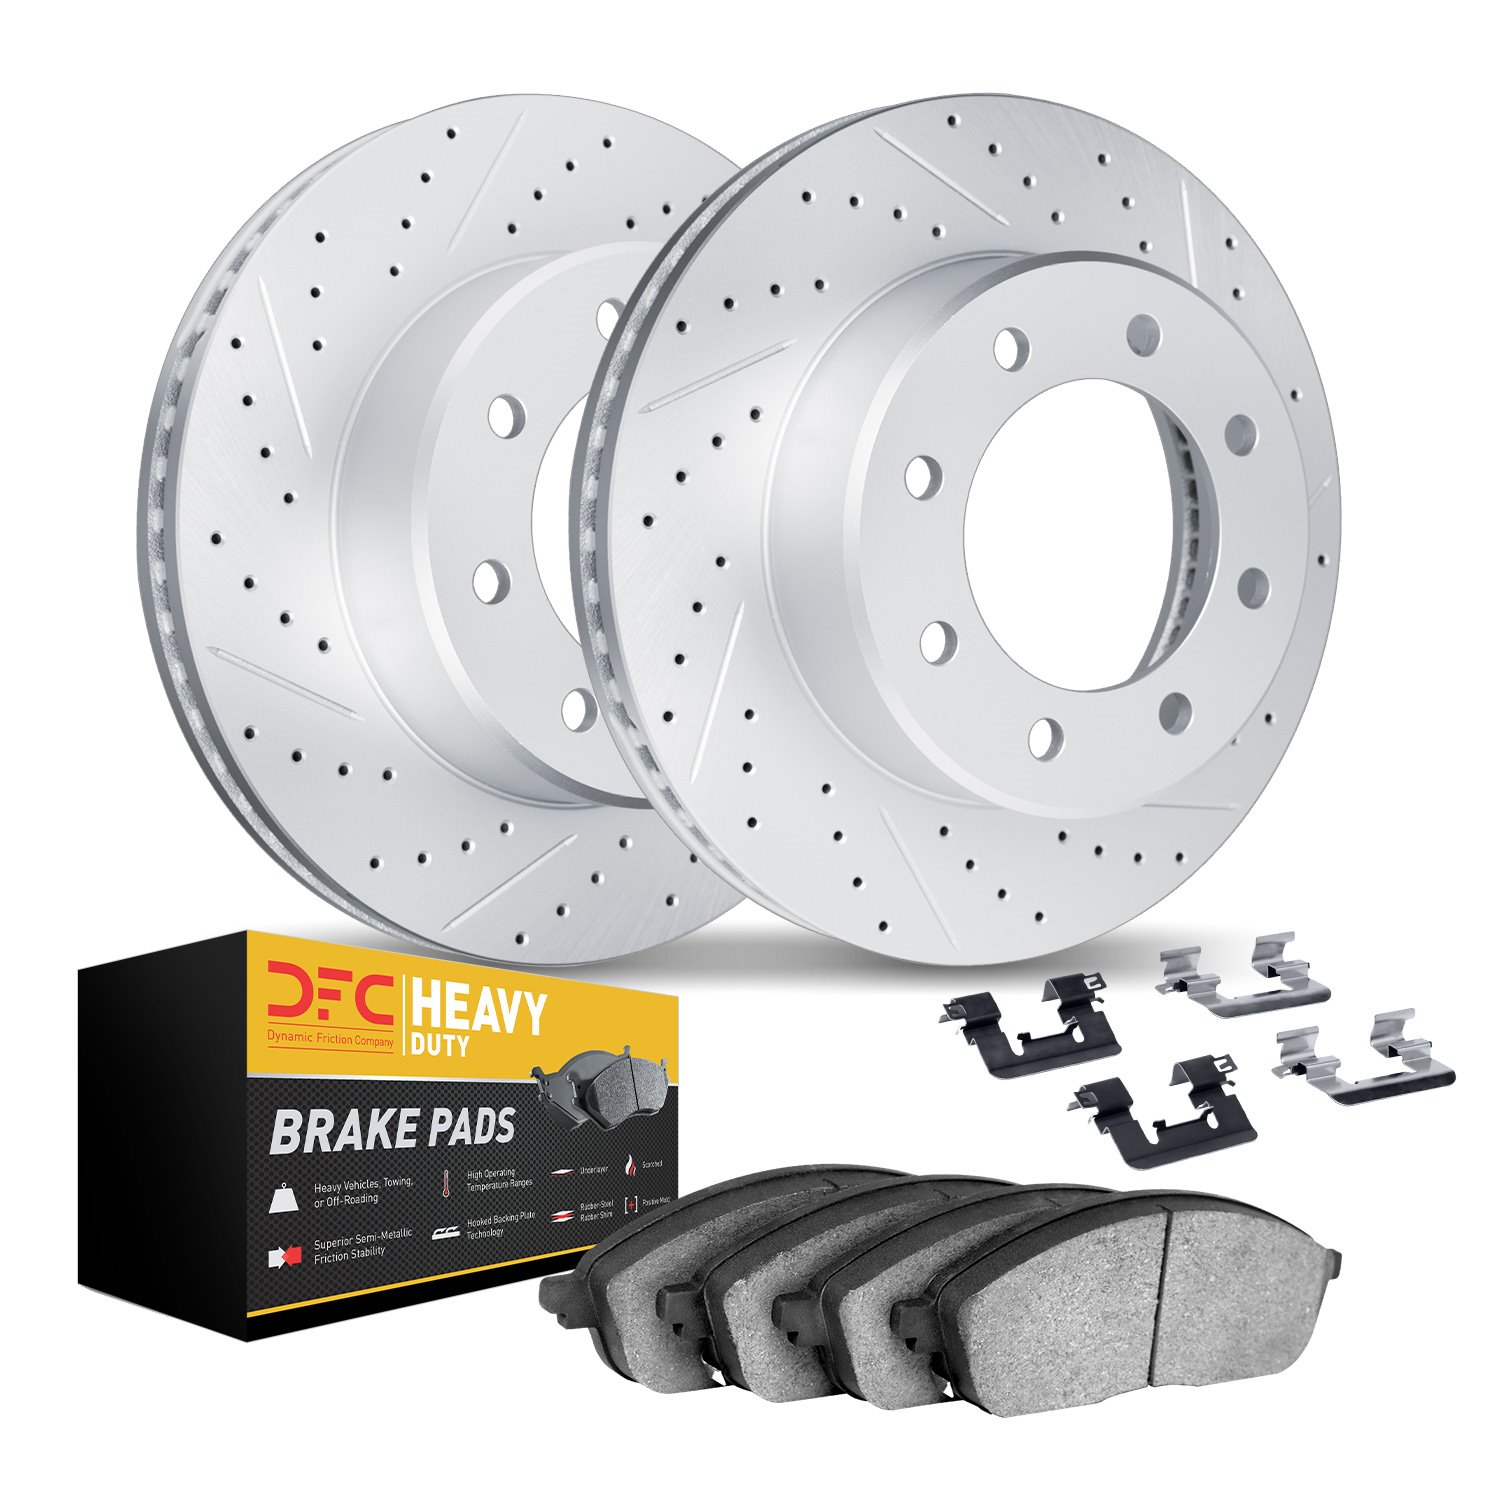 2212-99082 Geoperformance Drilled/Slotted Rotors w/Heavy-Duty Pads Kit & Hardware, 2000-2004 Ford/Lincoln/Mercury/Mazda, Positio